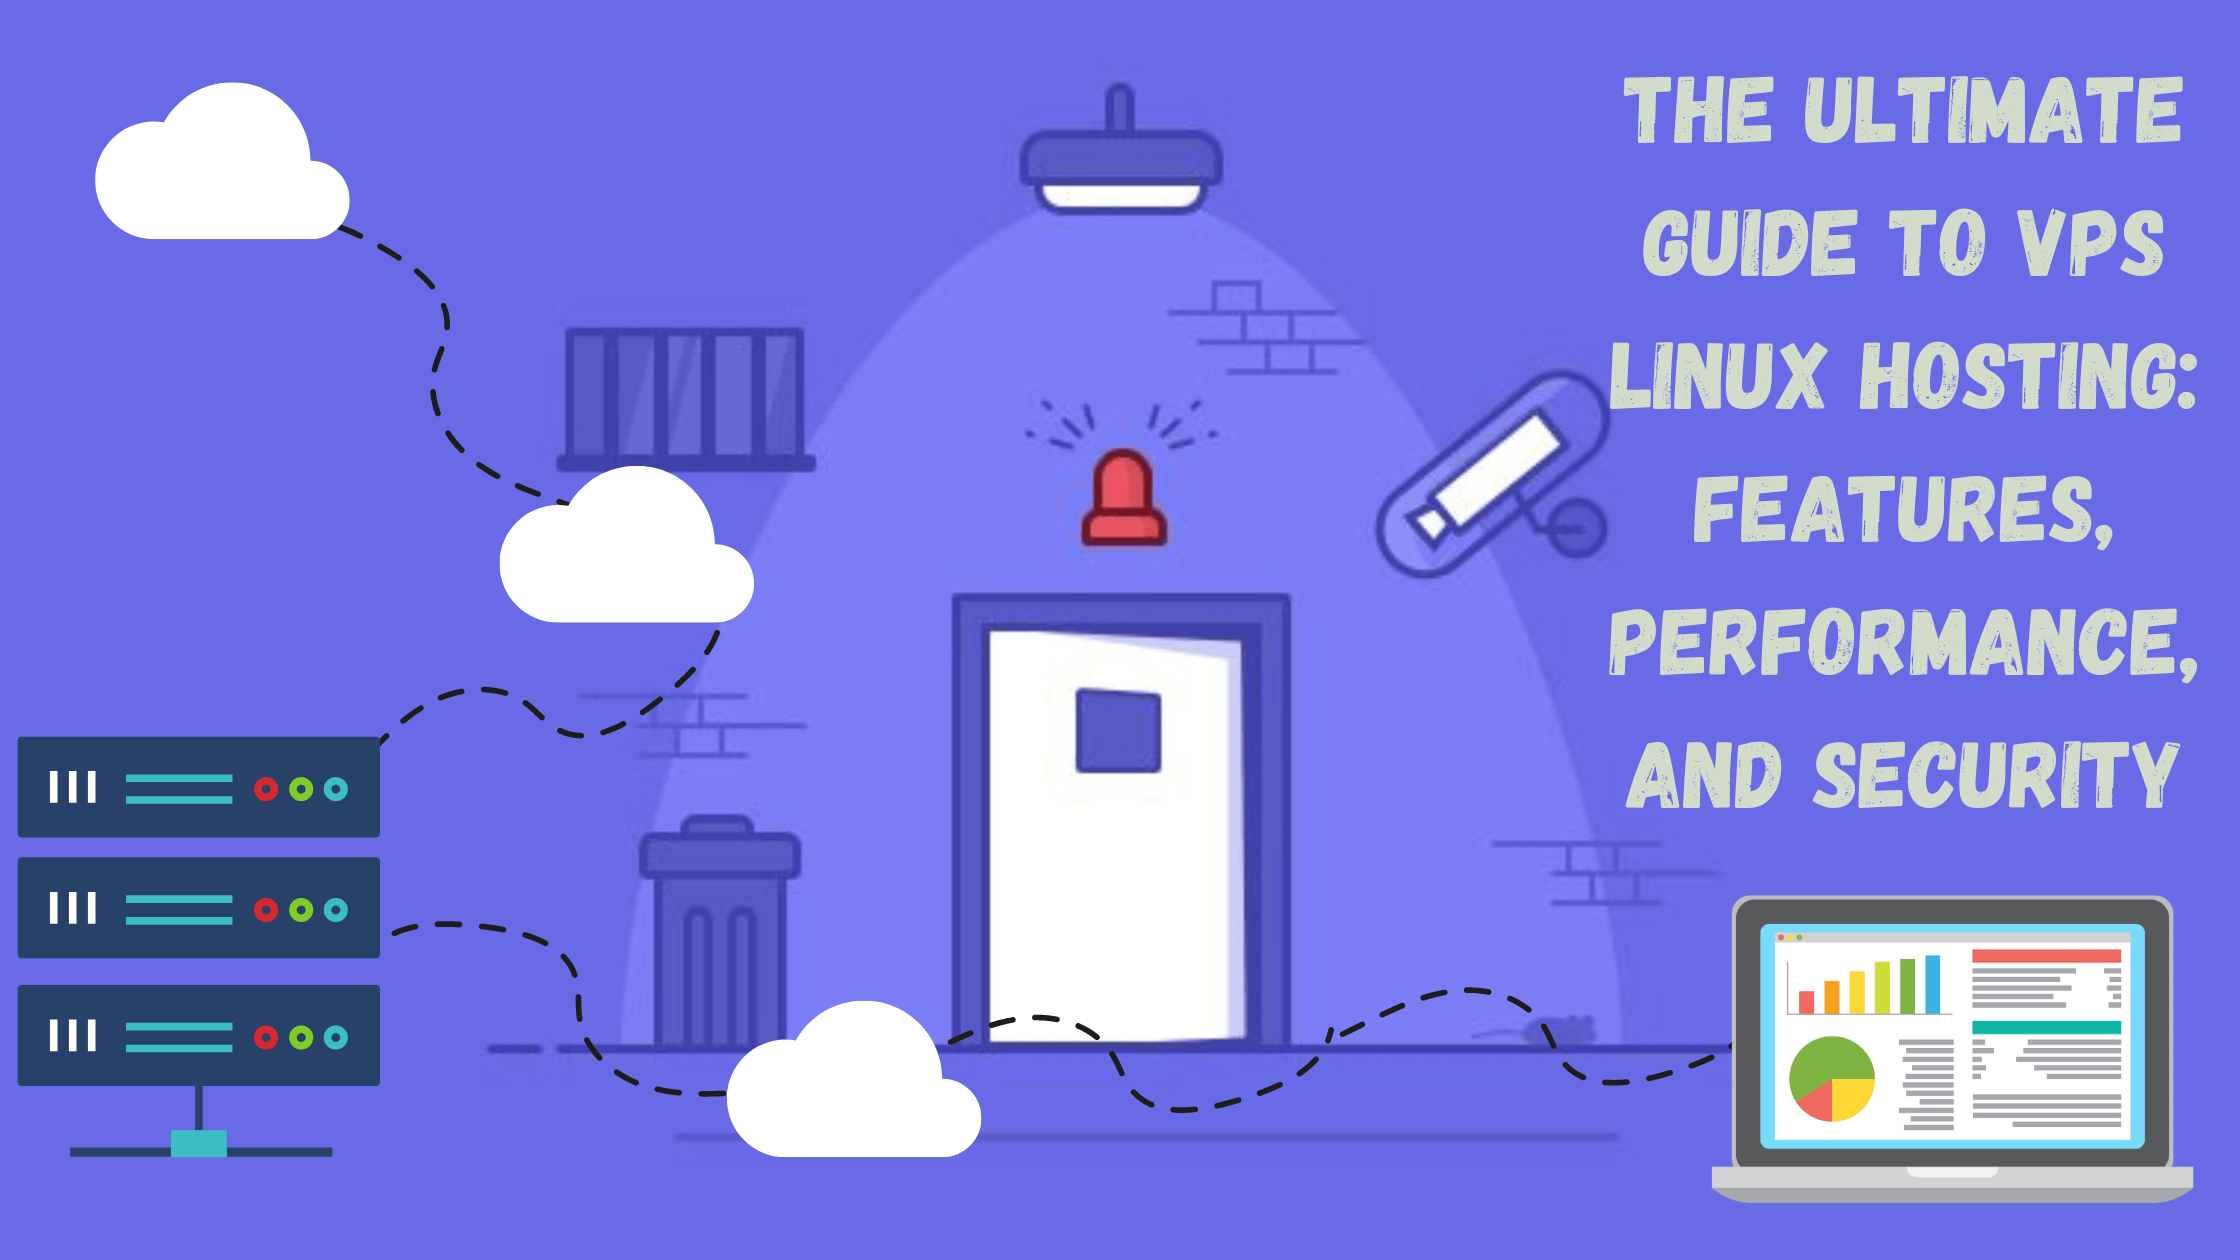 The Ultimate Guide to VPS Linux Hosting Features, Performance, and Security